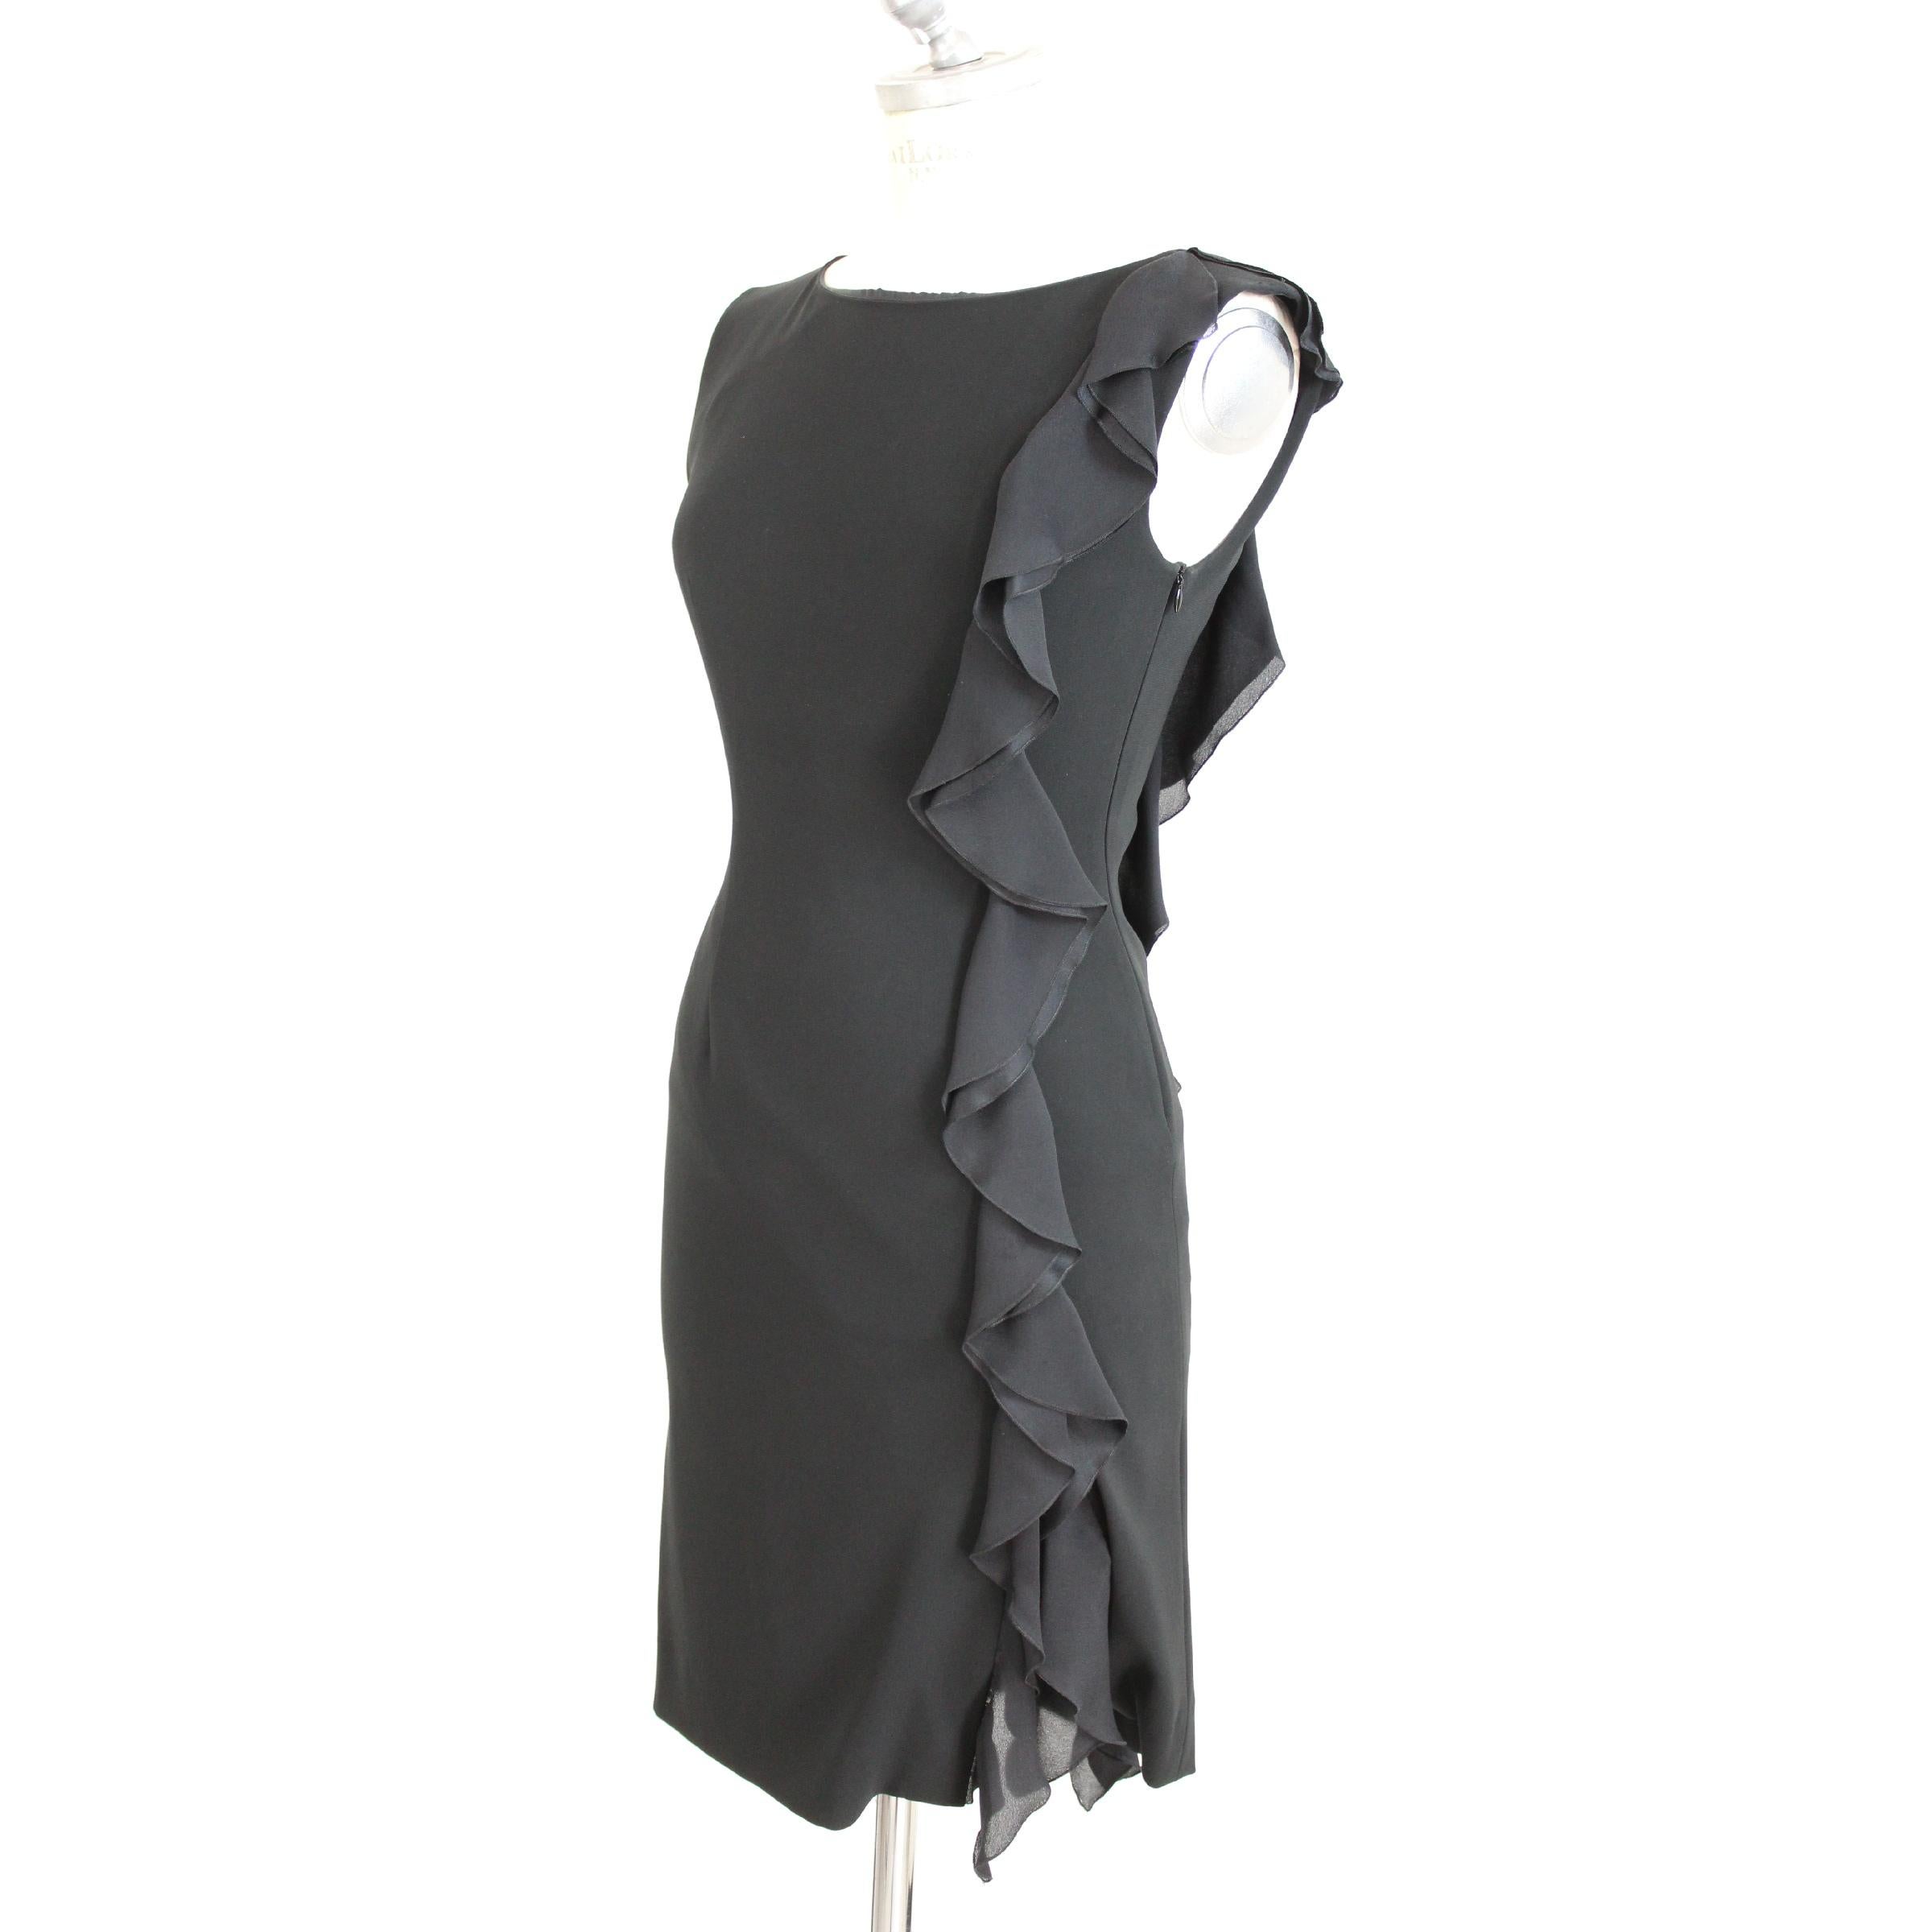 Moschino Cheap and Chic evening dress. Color black sheath dress model. Sleeveless round neck with applications along the left side both front and back. Zip closure. Made in Italy. Excellent vintage conditions. Fabric: 64% triacetate 36%